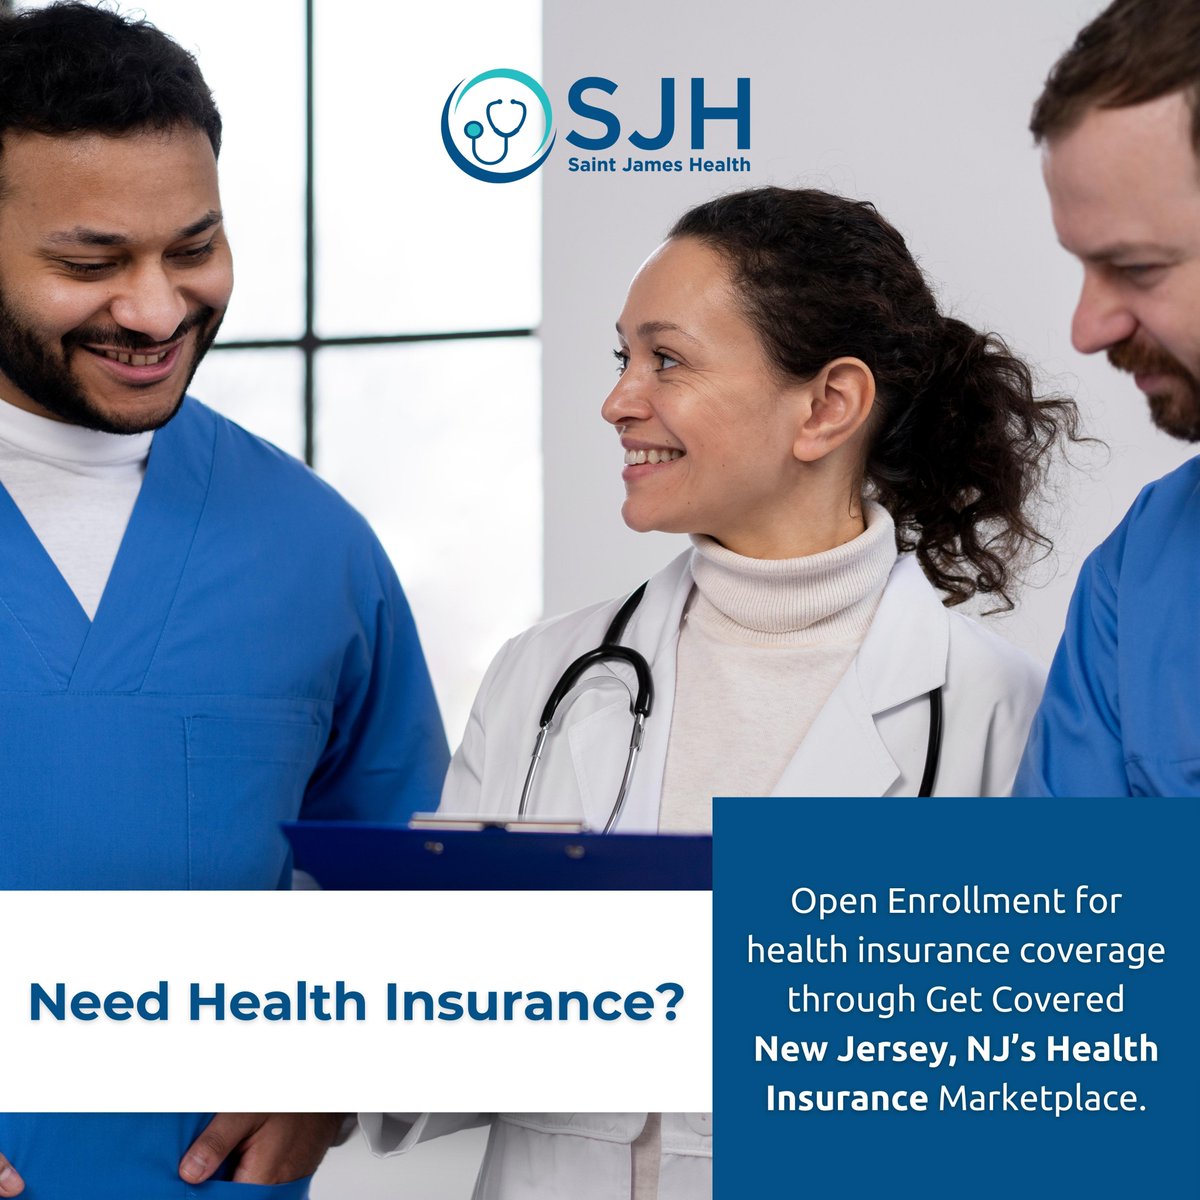 Secure your well-being with health insurance! Open enrollment is here for New Jersey residents through Get Covered. 

#SaintJamesHealth #HealthInsurance #OpenEnrollment #GetCoveredNJ #WellnessPriority #HealthcareOptions #InsuranceMatters #ProtectYourHealth #NJHealthcare